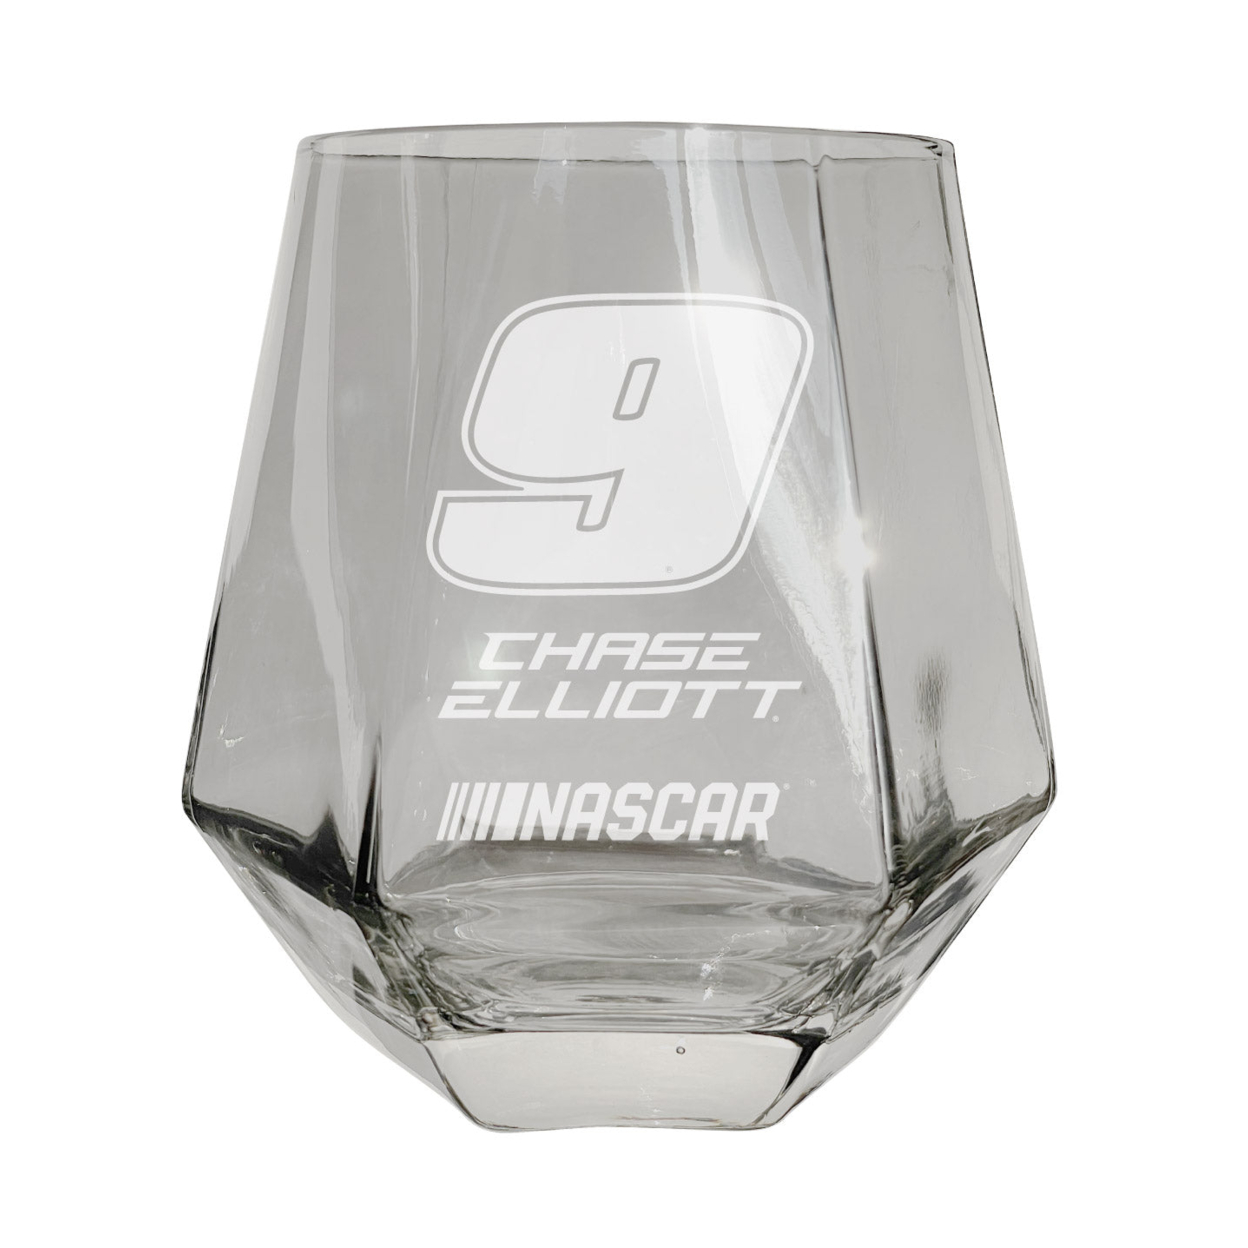 #9 Chase Elliott Officially Licensed 10 Oz Engraved Diamond Wine Glass - Clear, Single